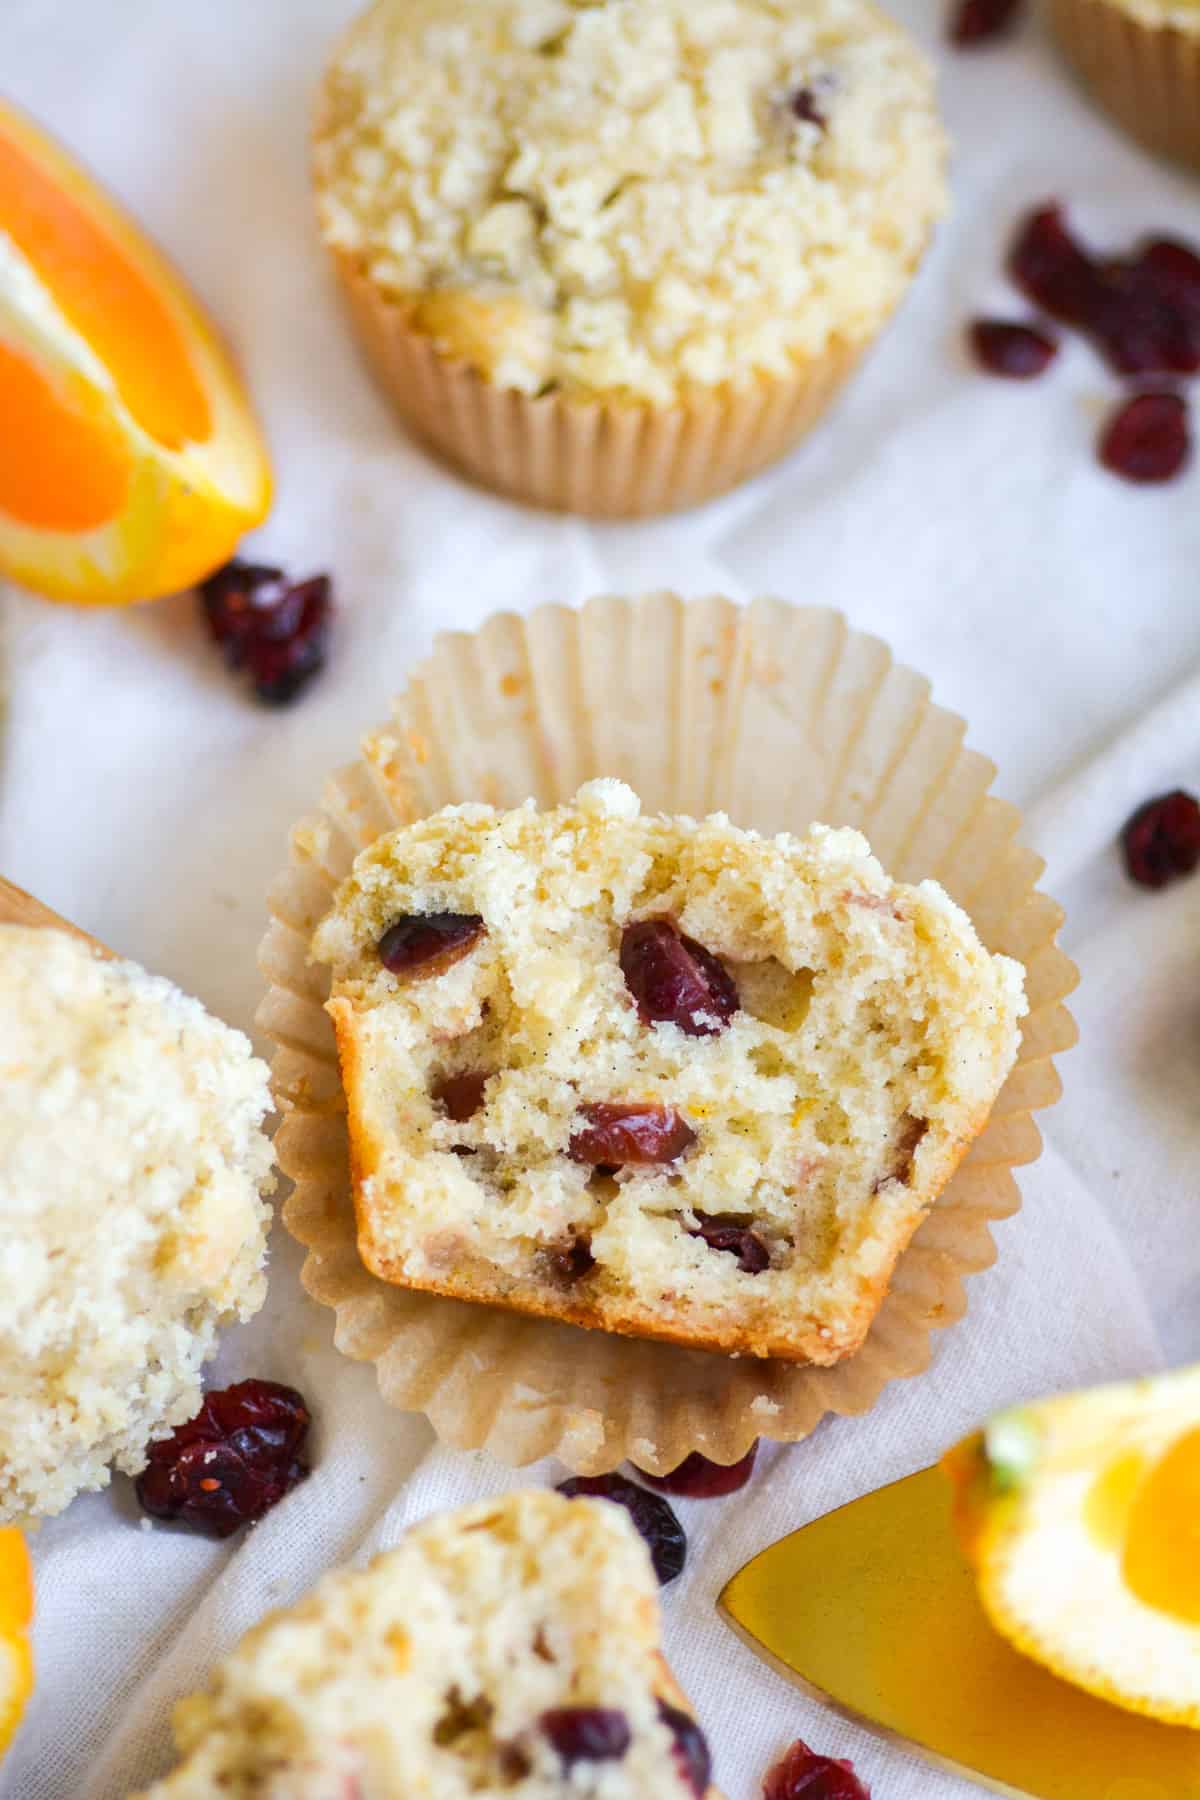 A Vegan Cranberry Orange Muffin broken in half and laying in the muffin liner.